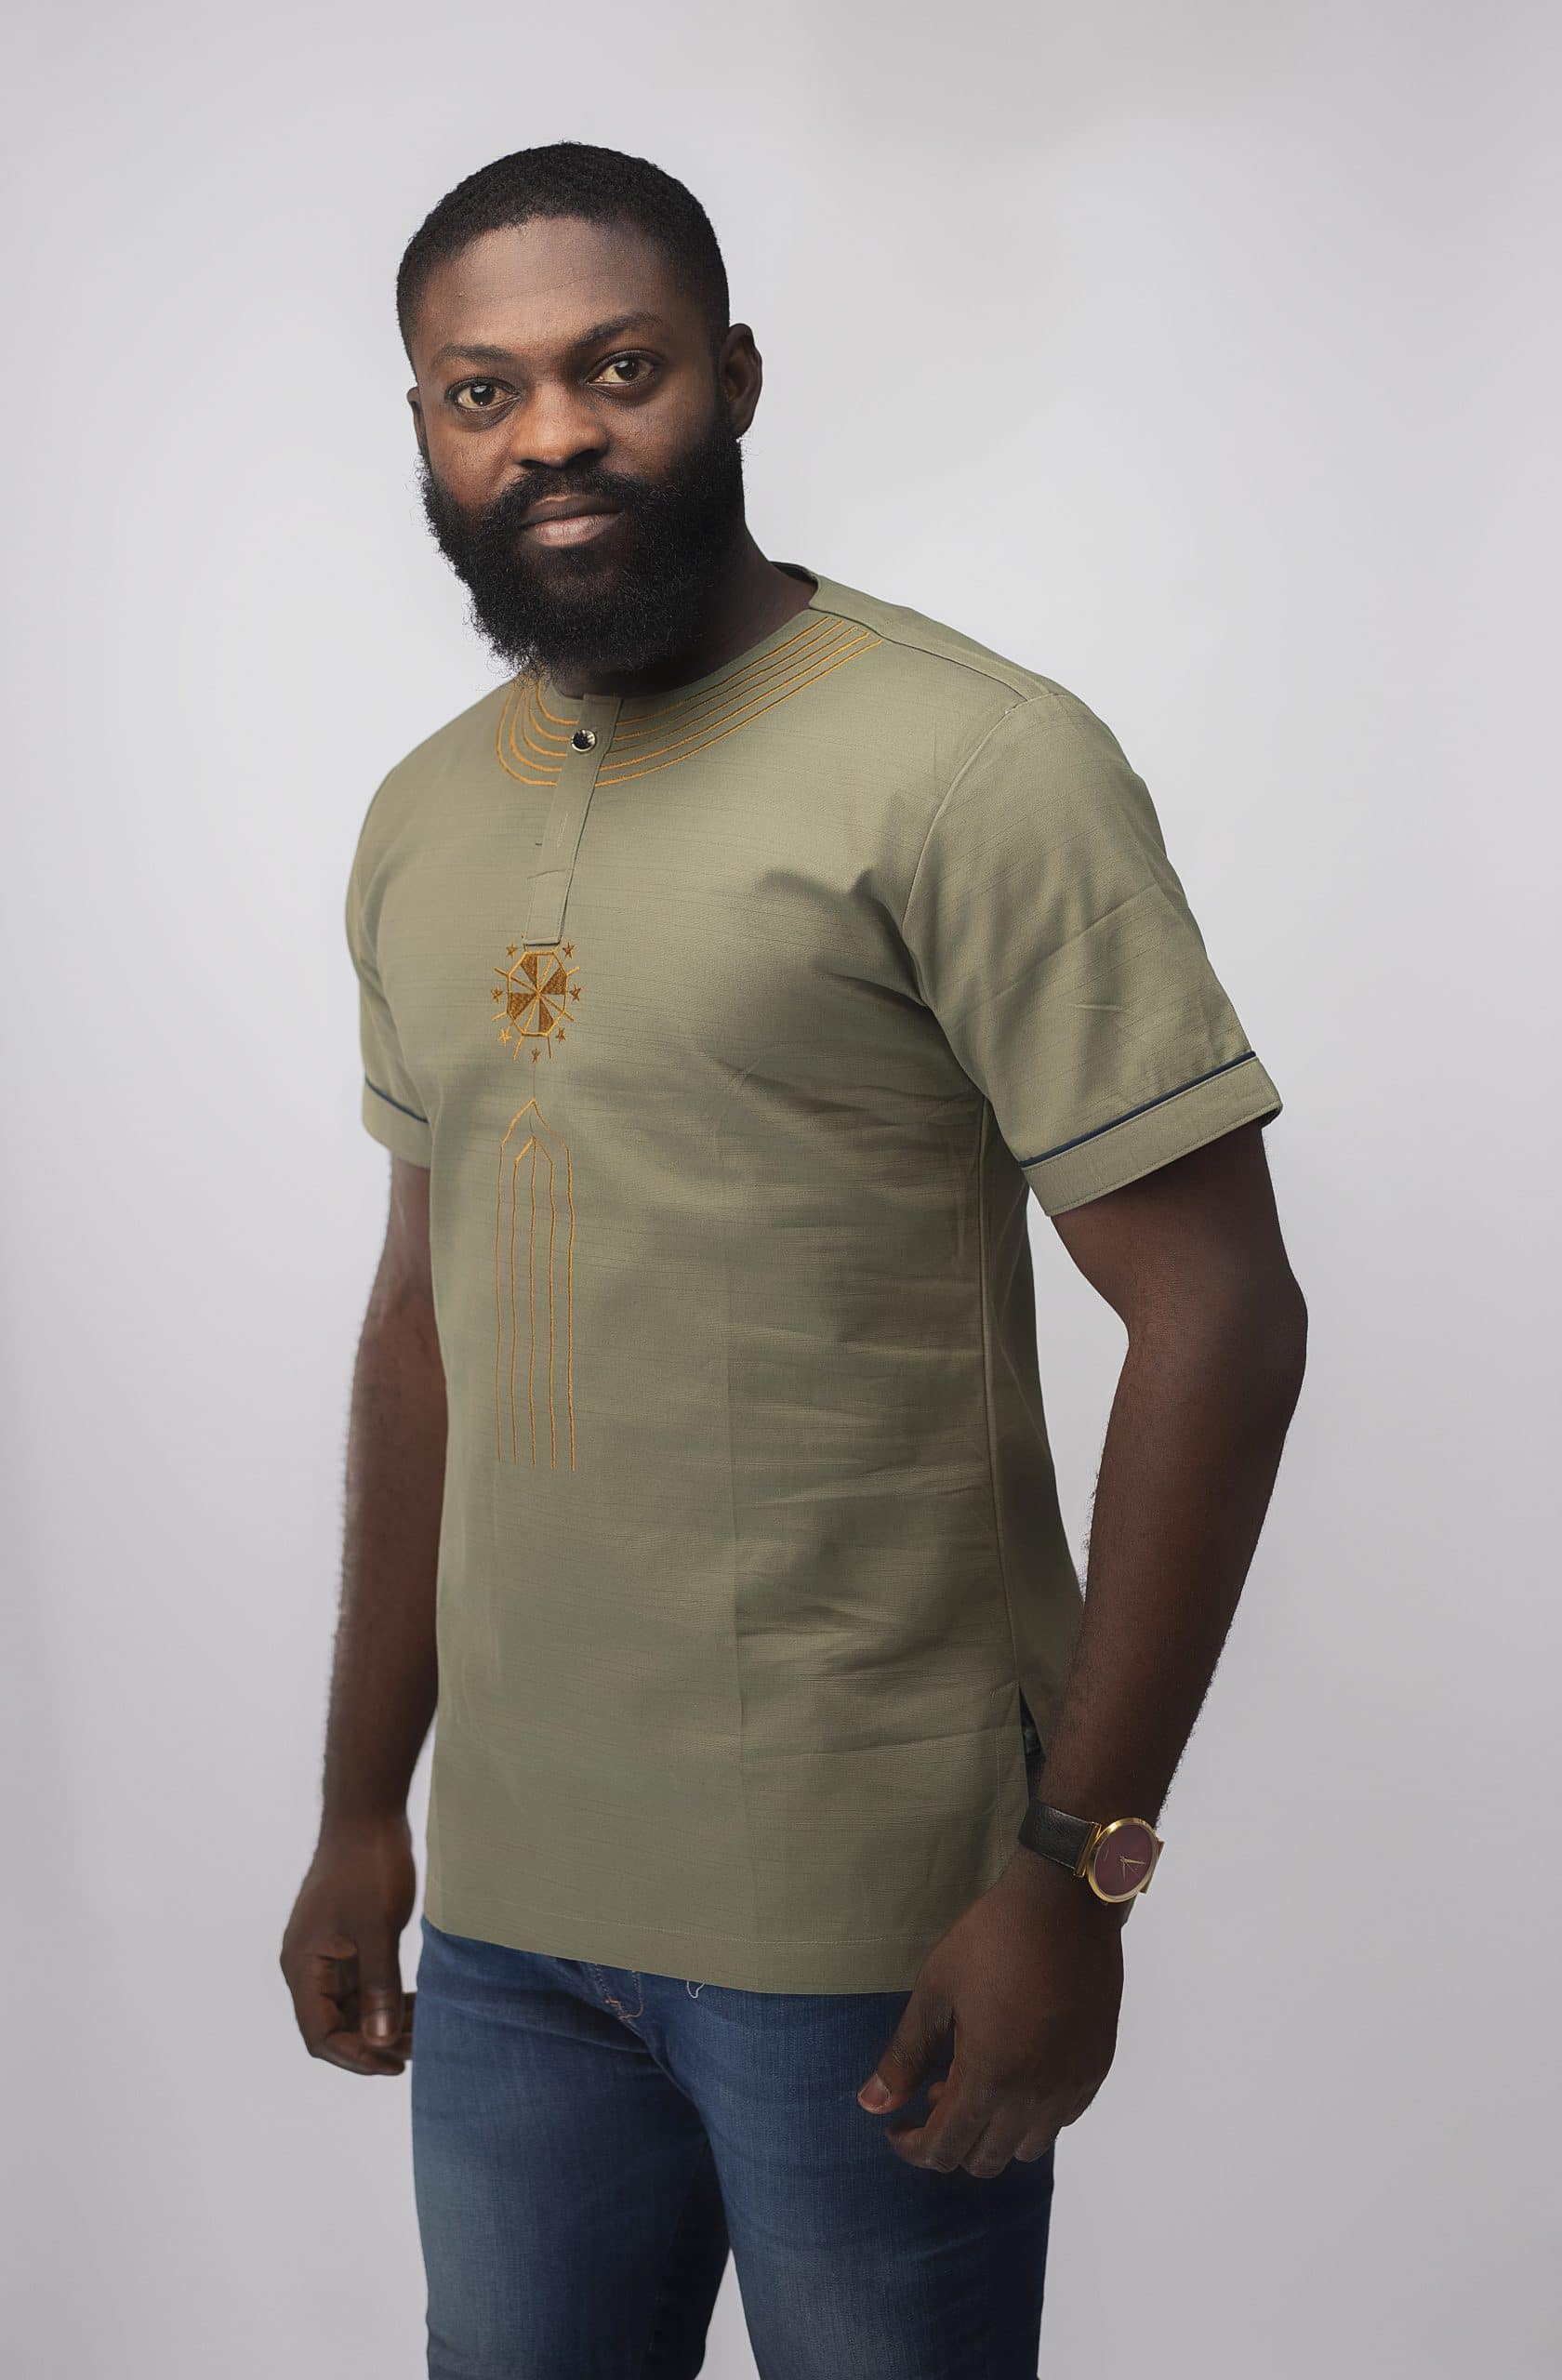 Frontal of model wearing our Momar Slim Fit Embroidered African Shirt in khaki featuring a simple gold embroidery pattern on neckline, chest and black embroidery on the sleeves.